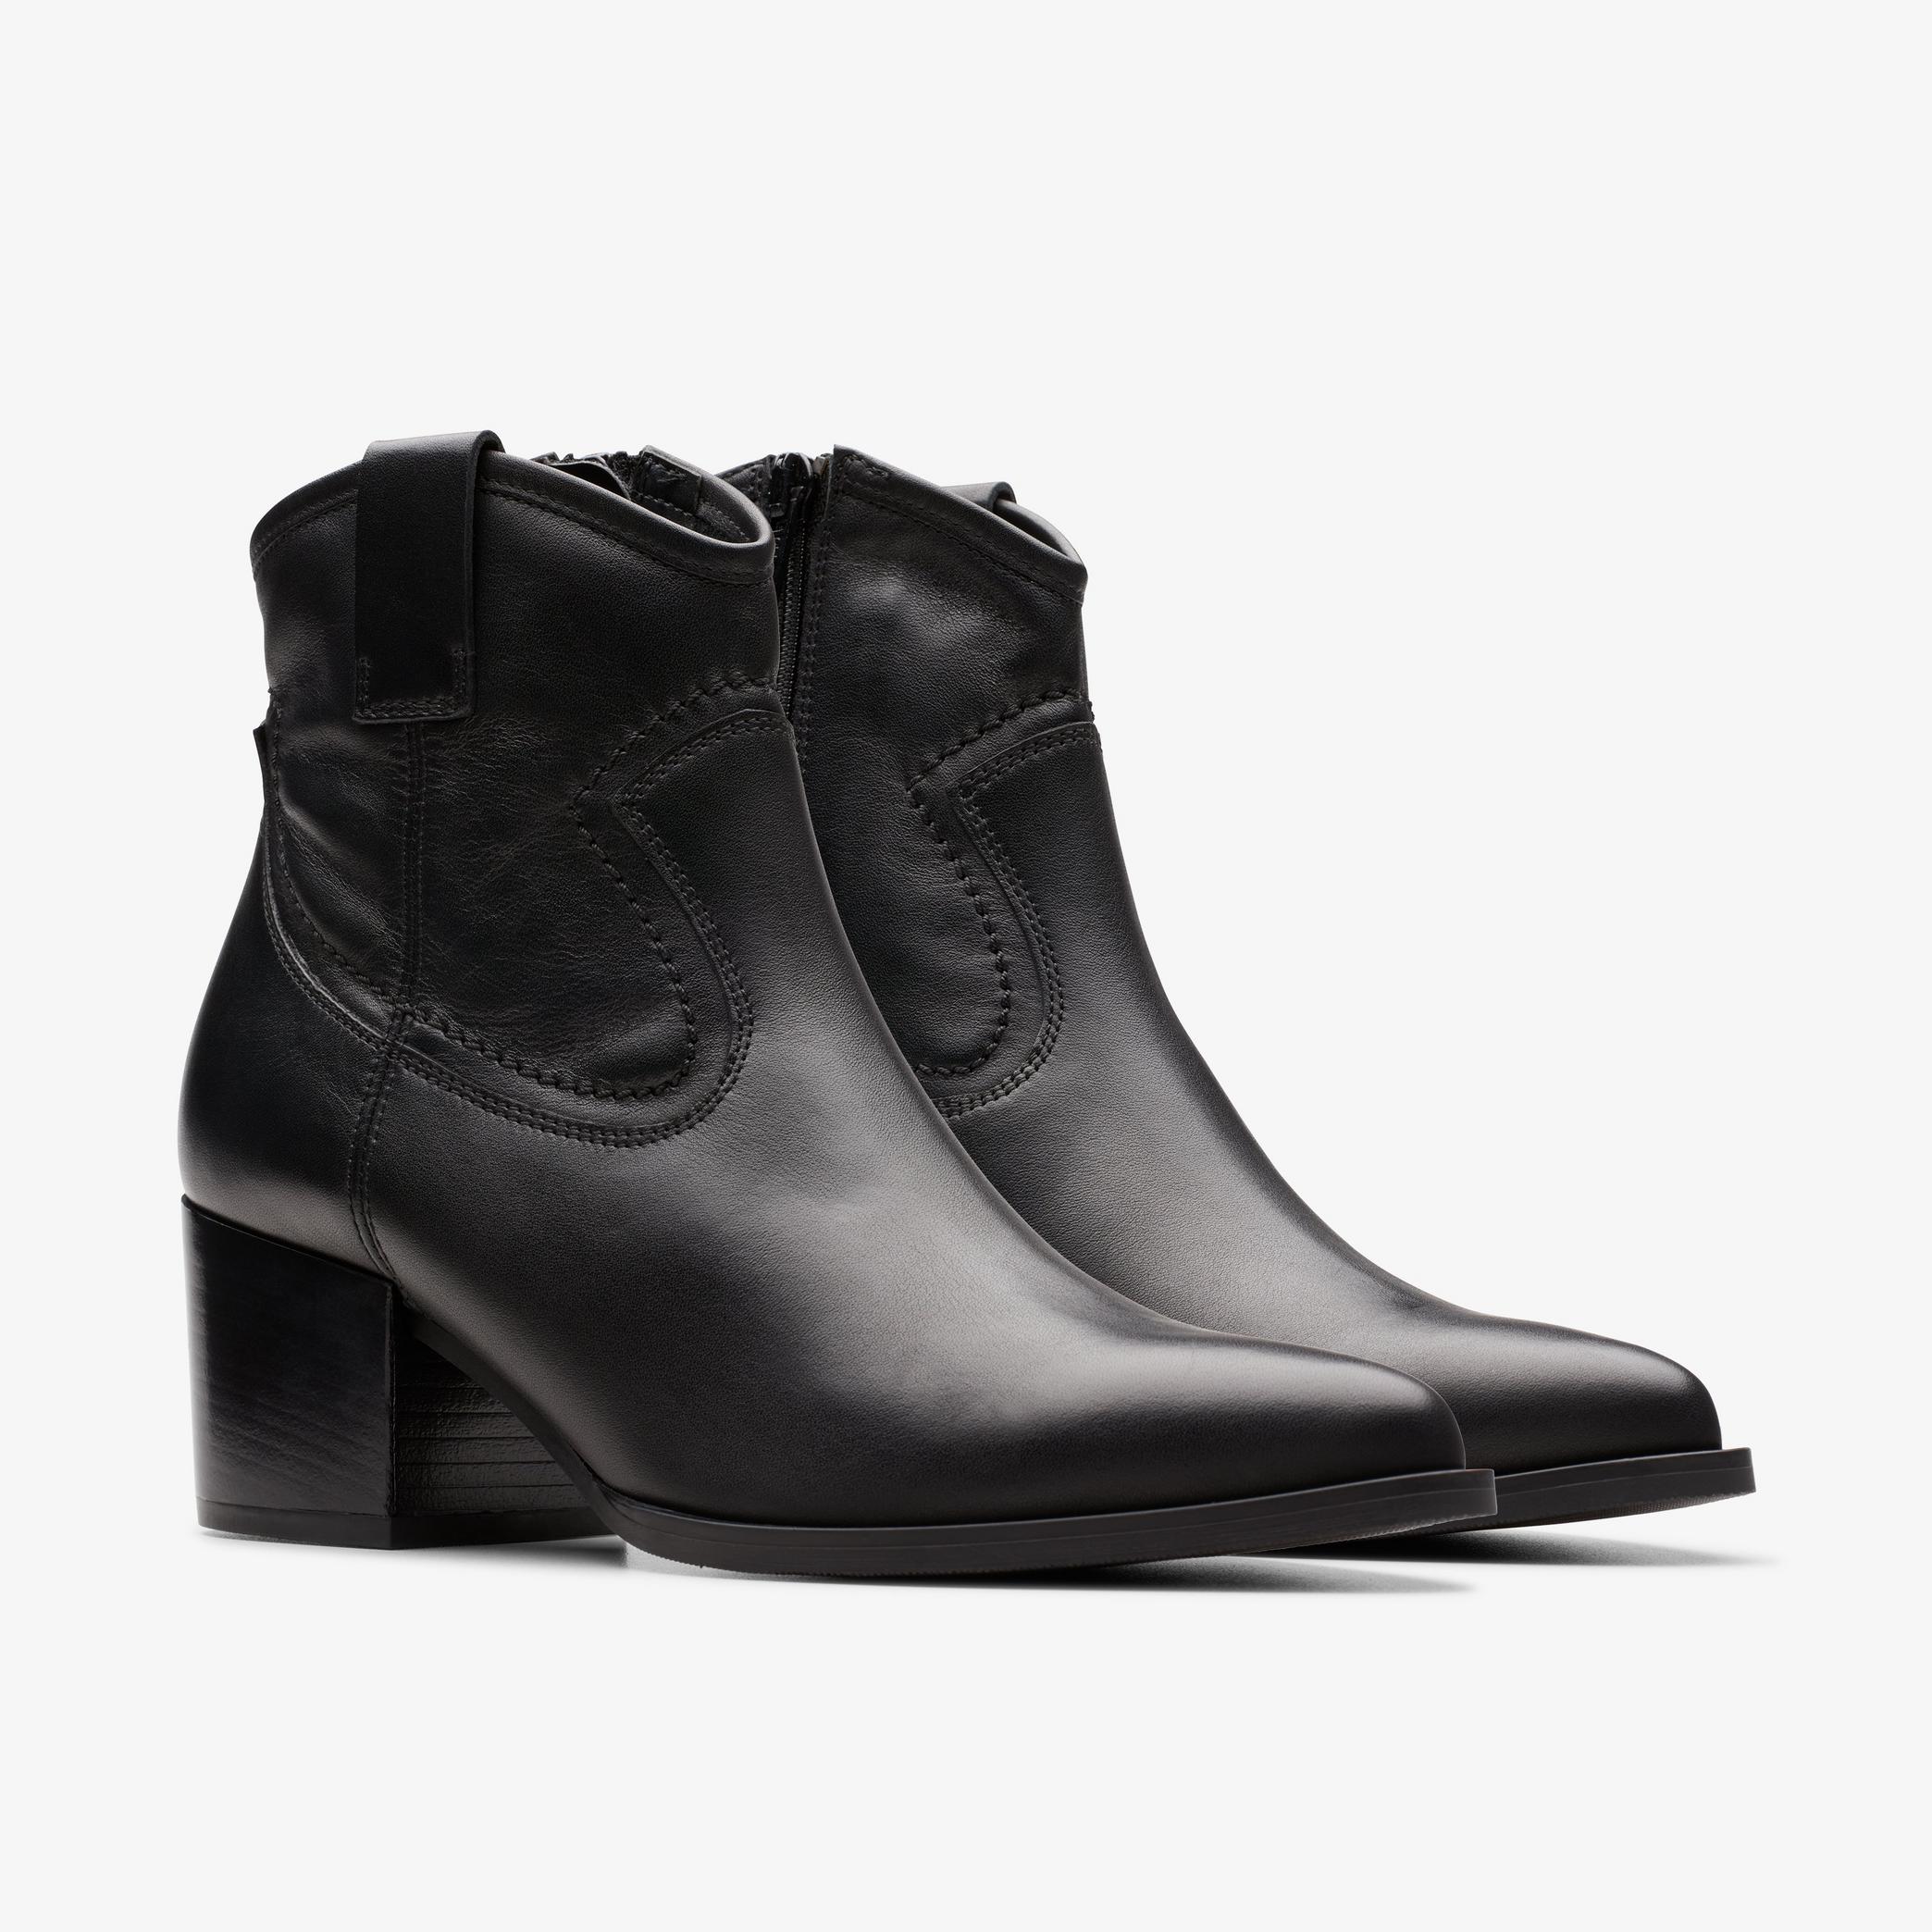 Elder Rae Black Ankle Boots, view 4 of 6